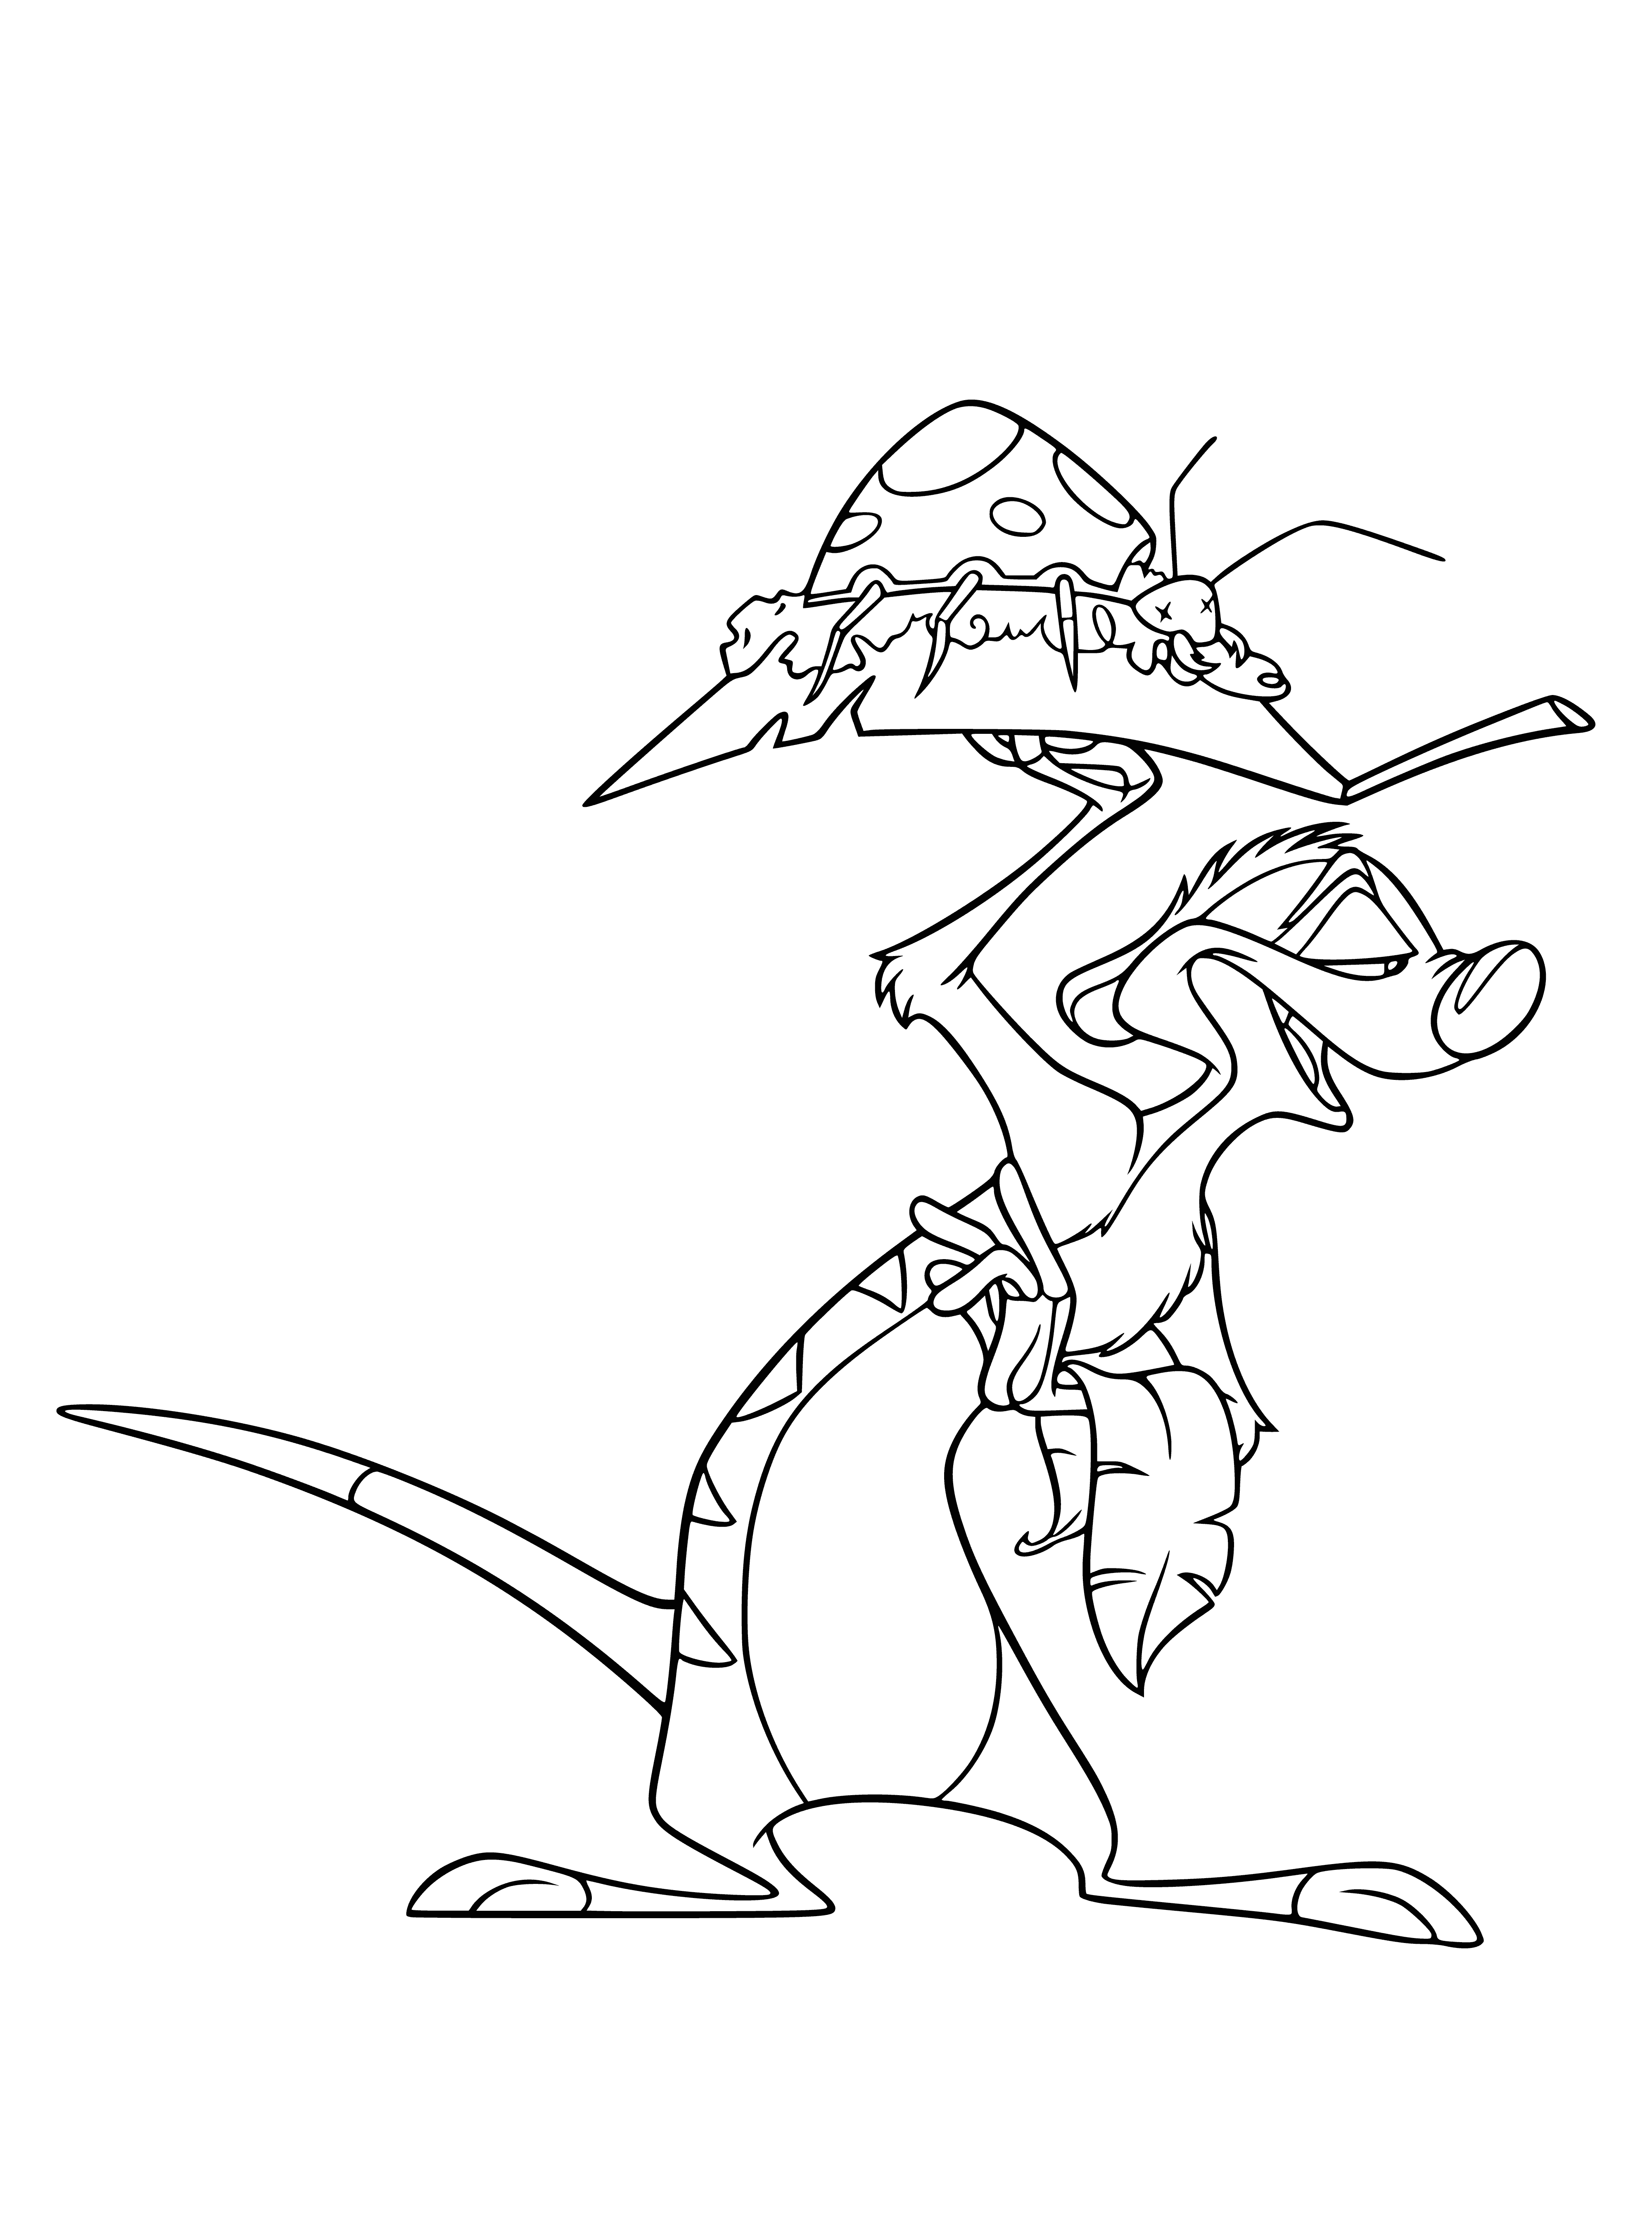 Mongoose Timon coloring page